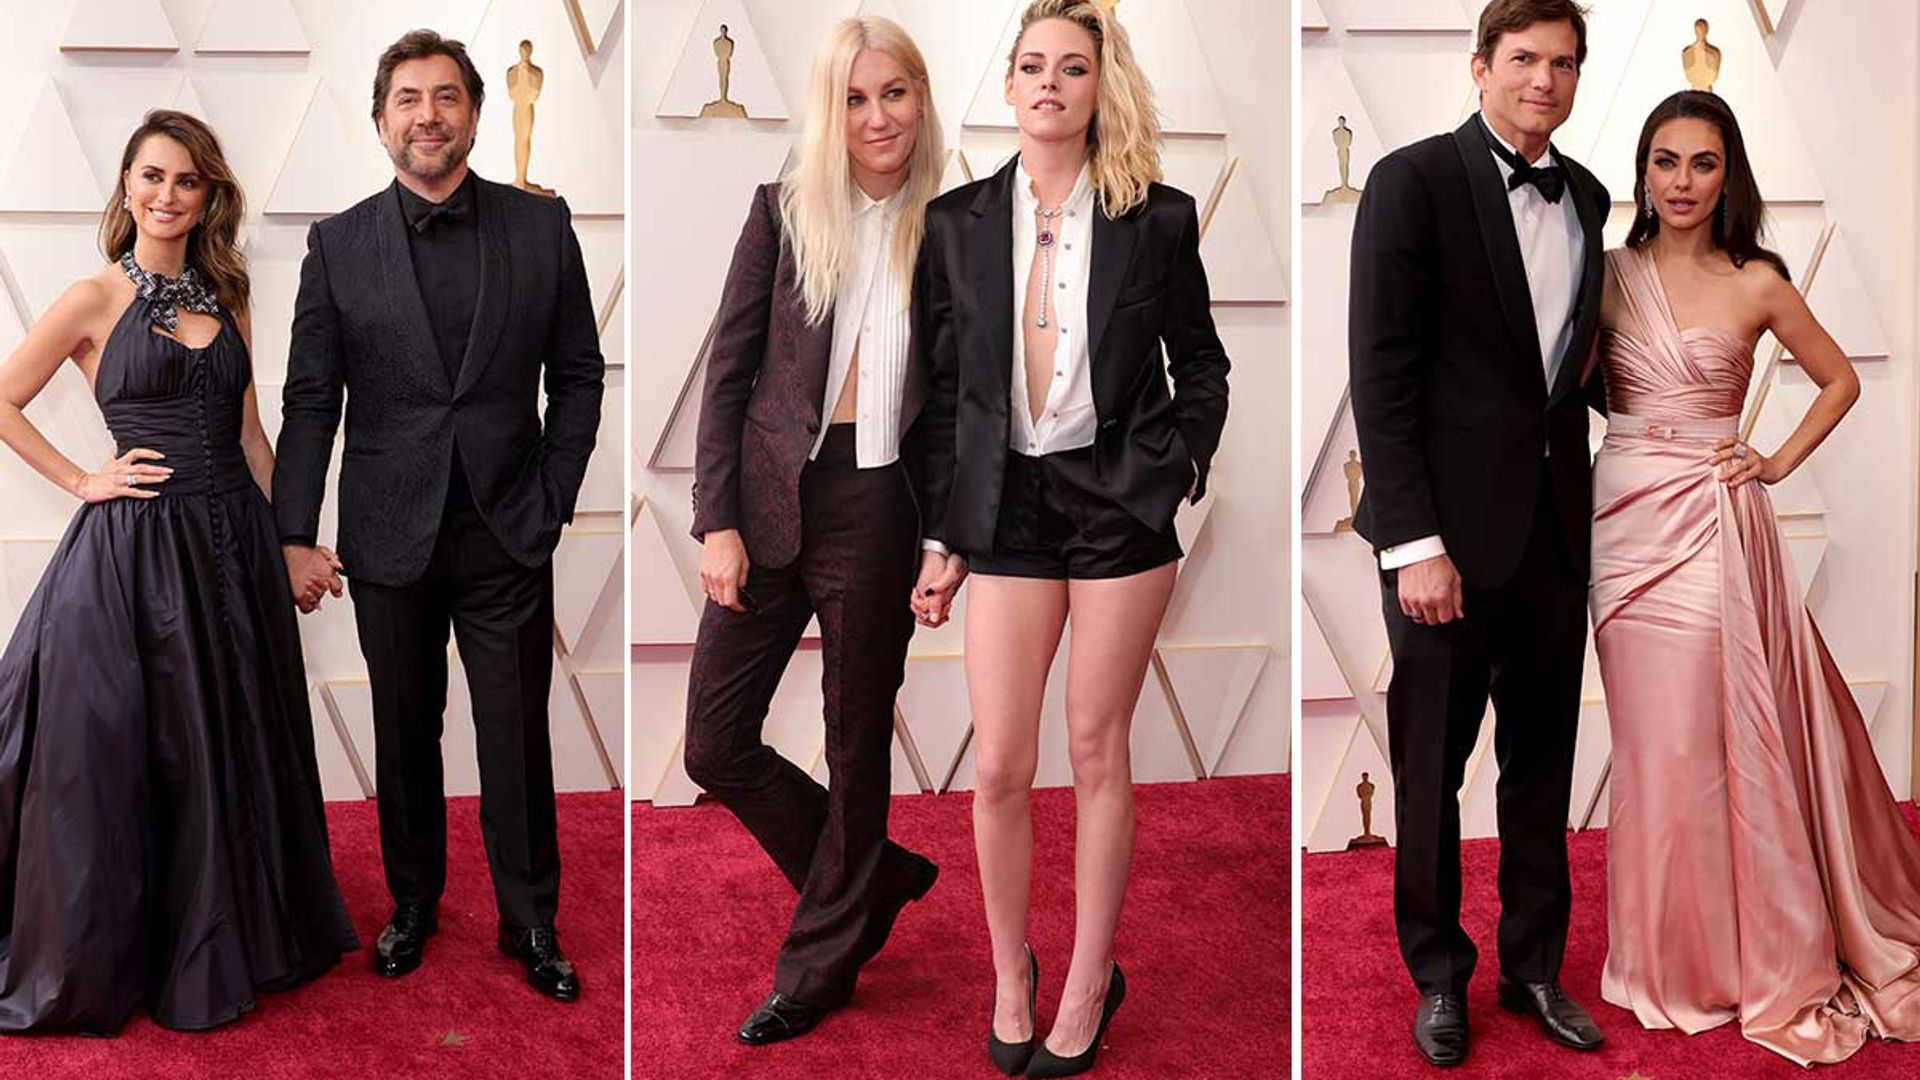 12 of the most stylish celebrity couples at the 2022 Oscars